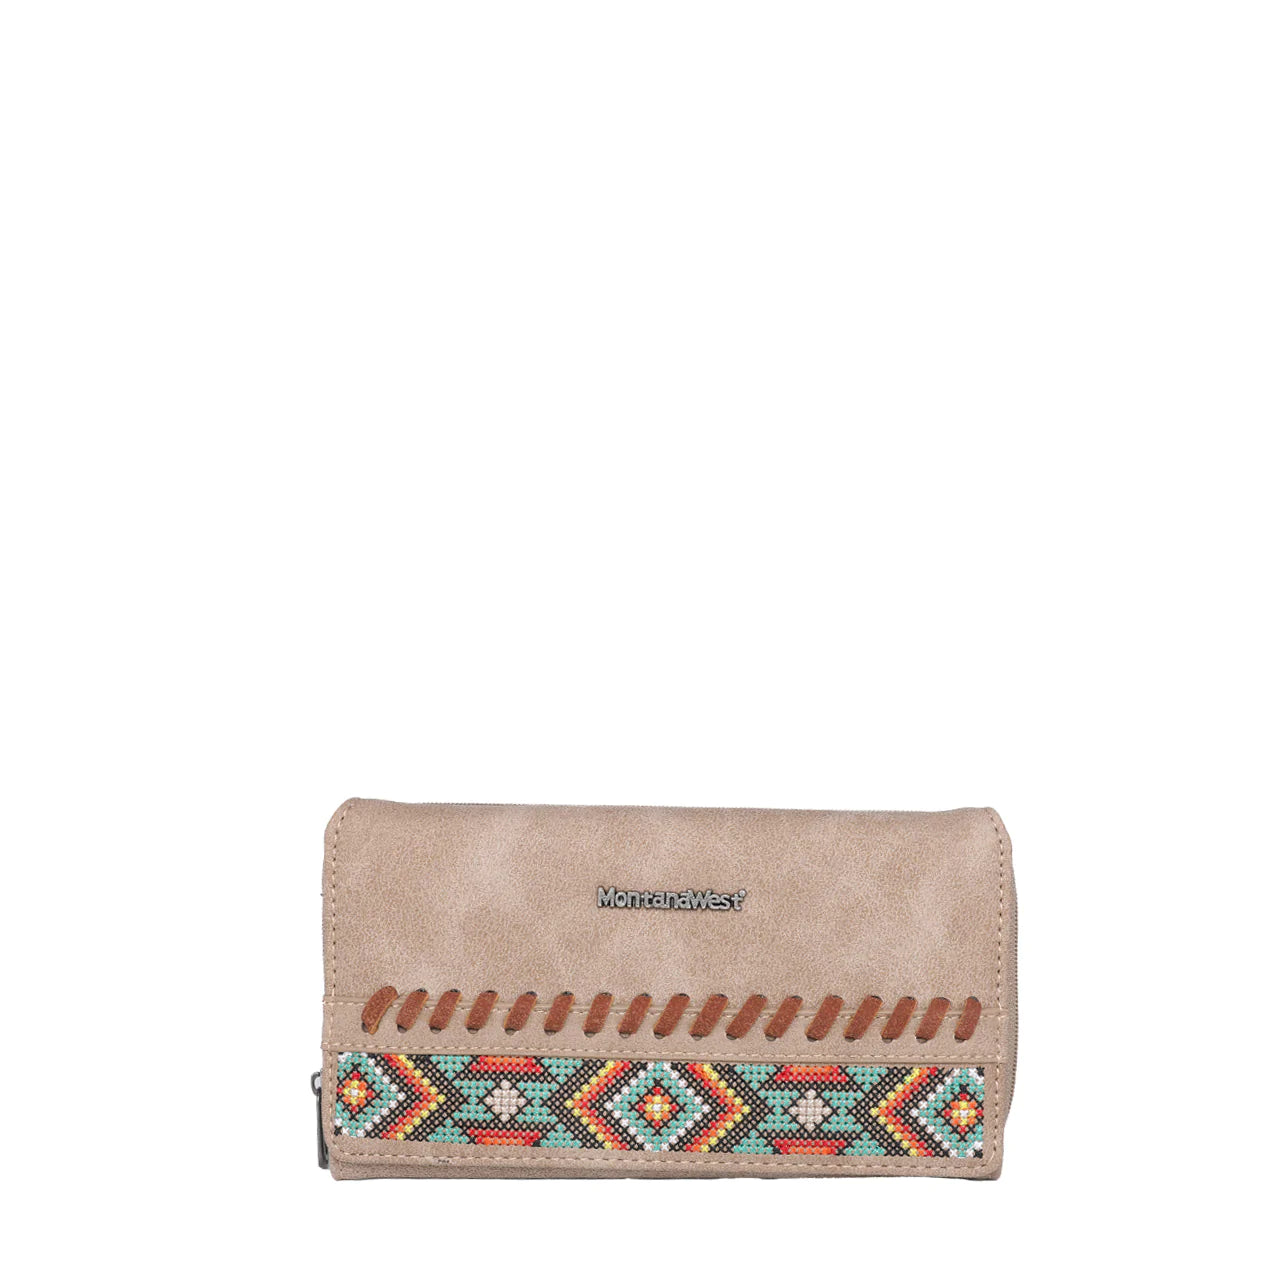 MW1074W010 - Montana West Embroidered Aztec Collection Wallet